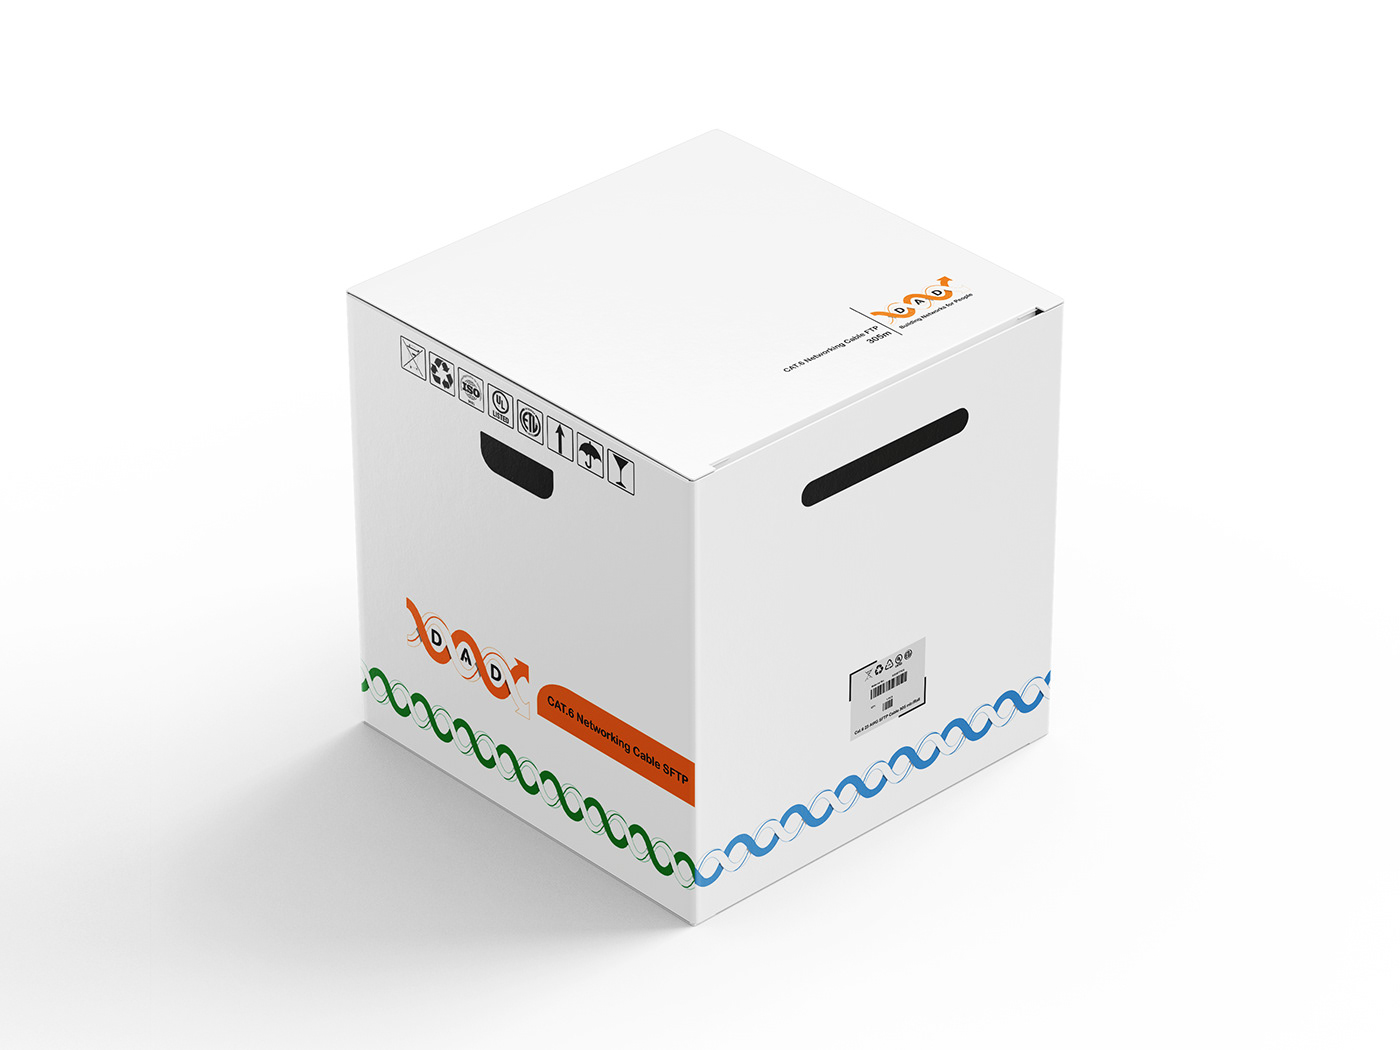 Mockup Cable square box Unfolded box Product Box Packaging design product brand 3d box